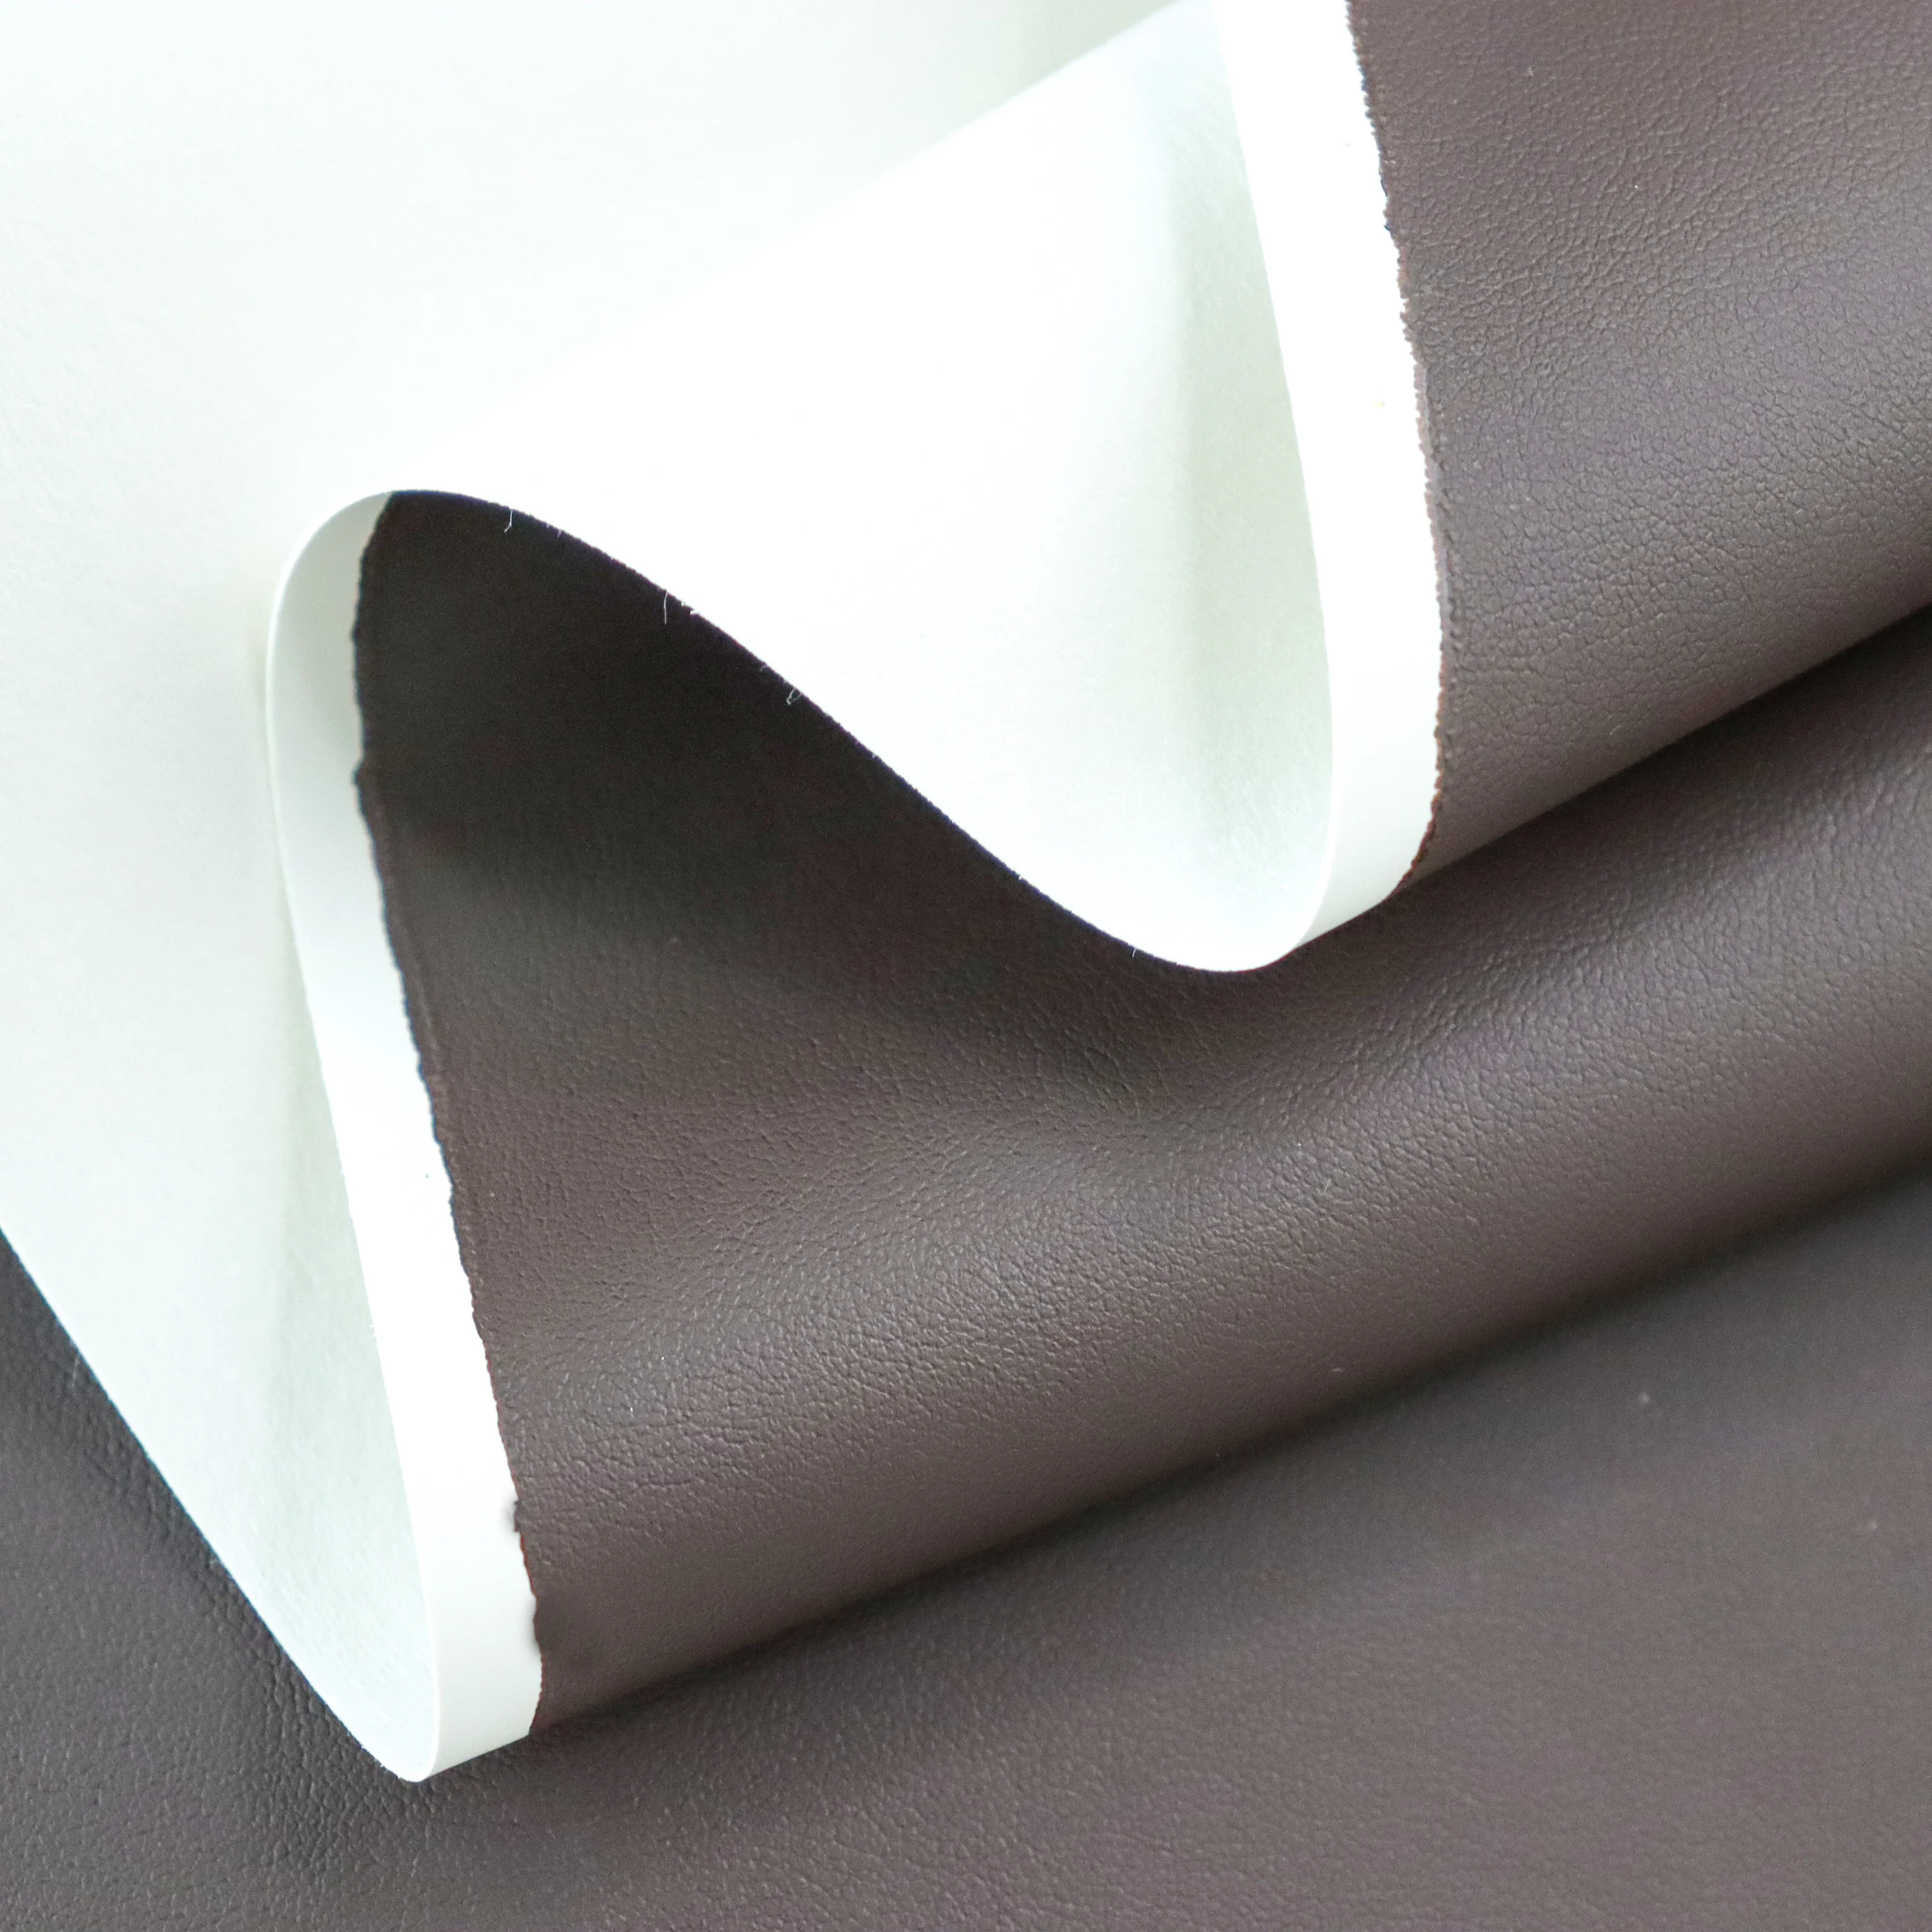 Cigno Leather - Vegan & Bio-Based Leather Rolls for Handbags & Recycled Leather Applications